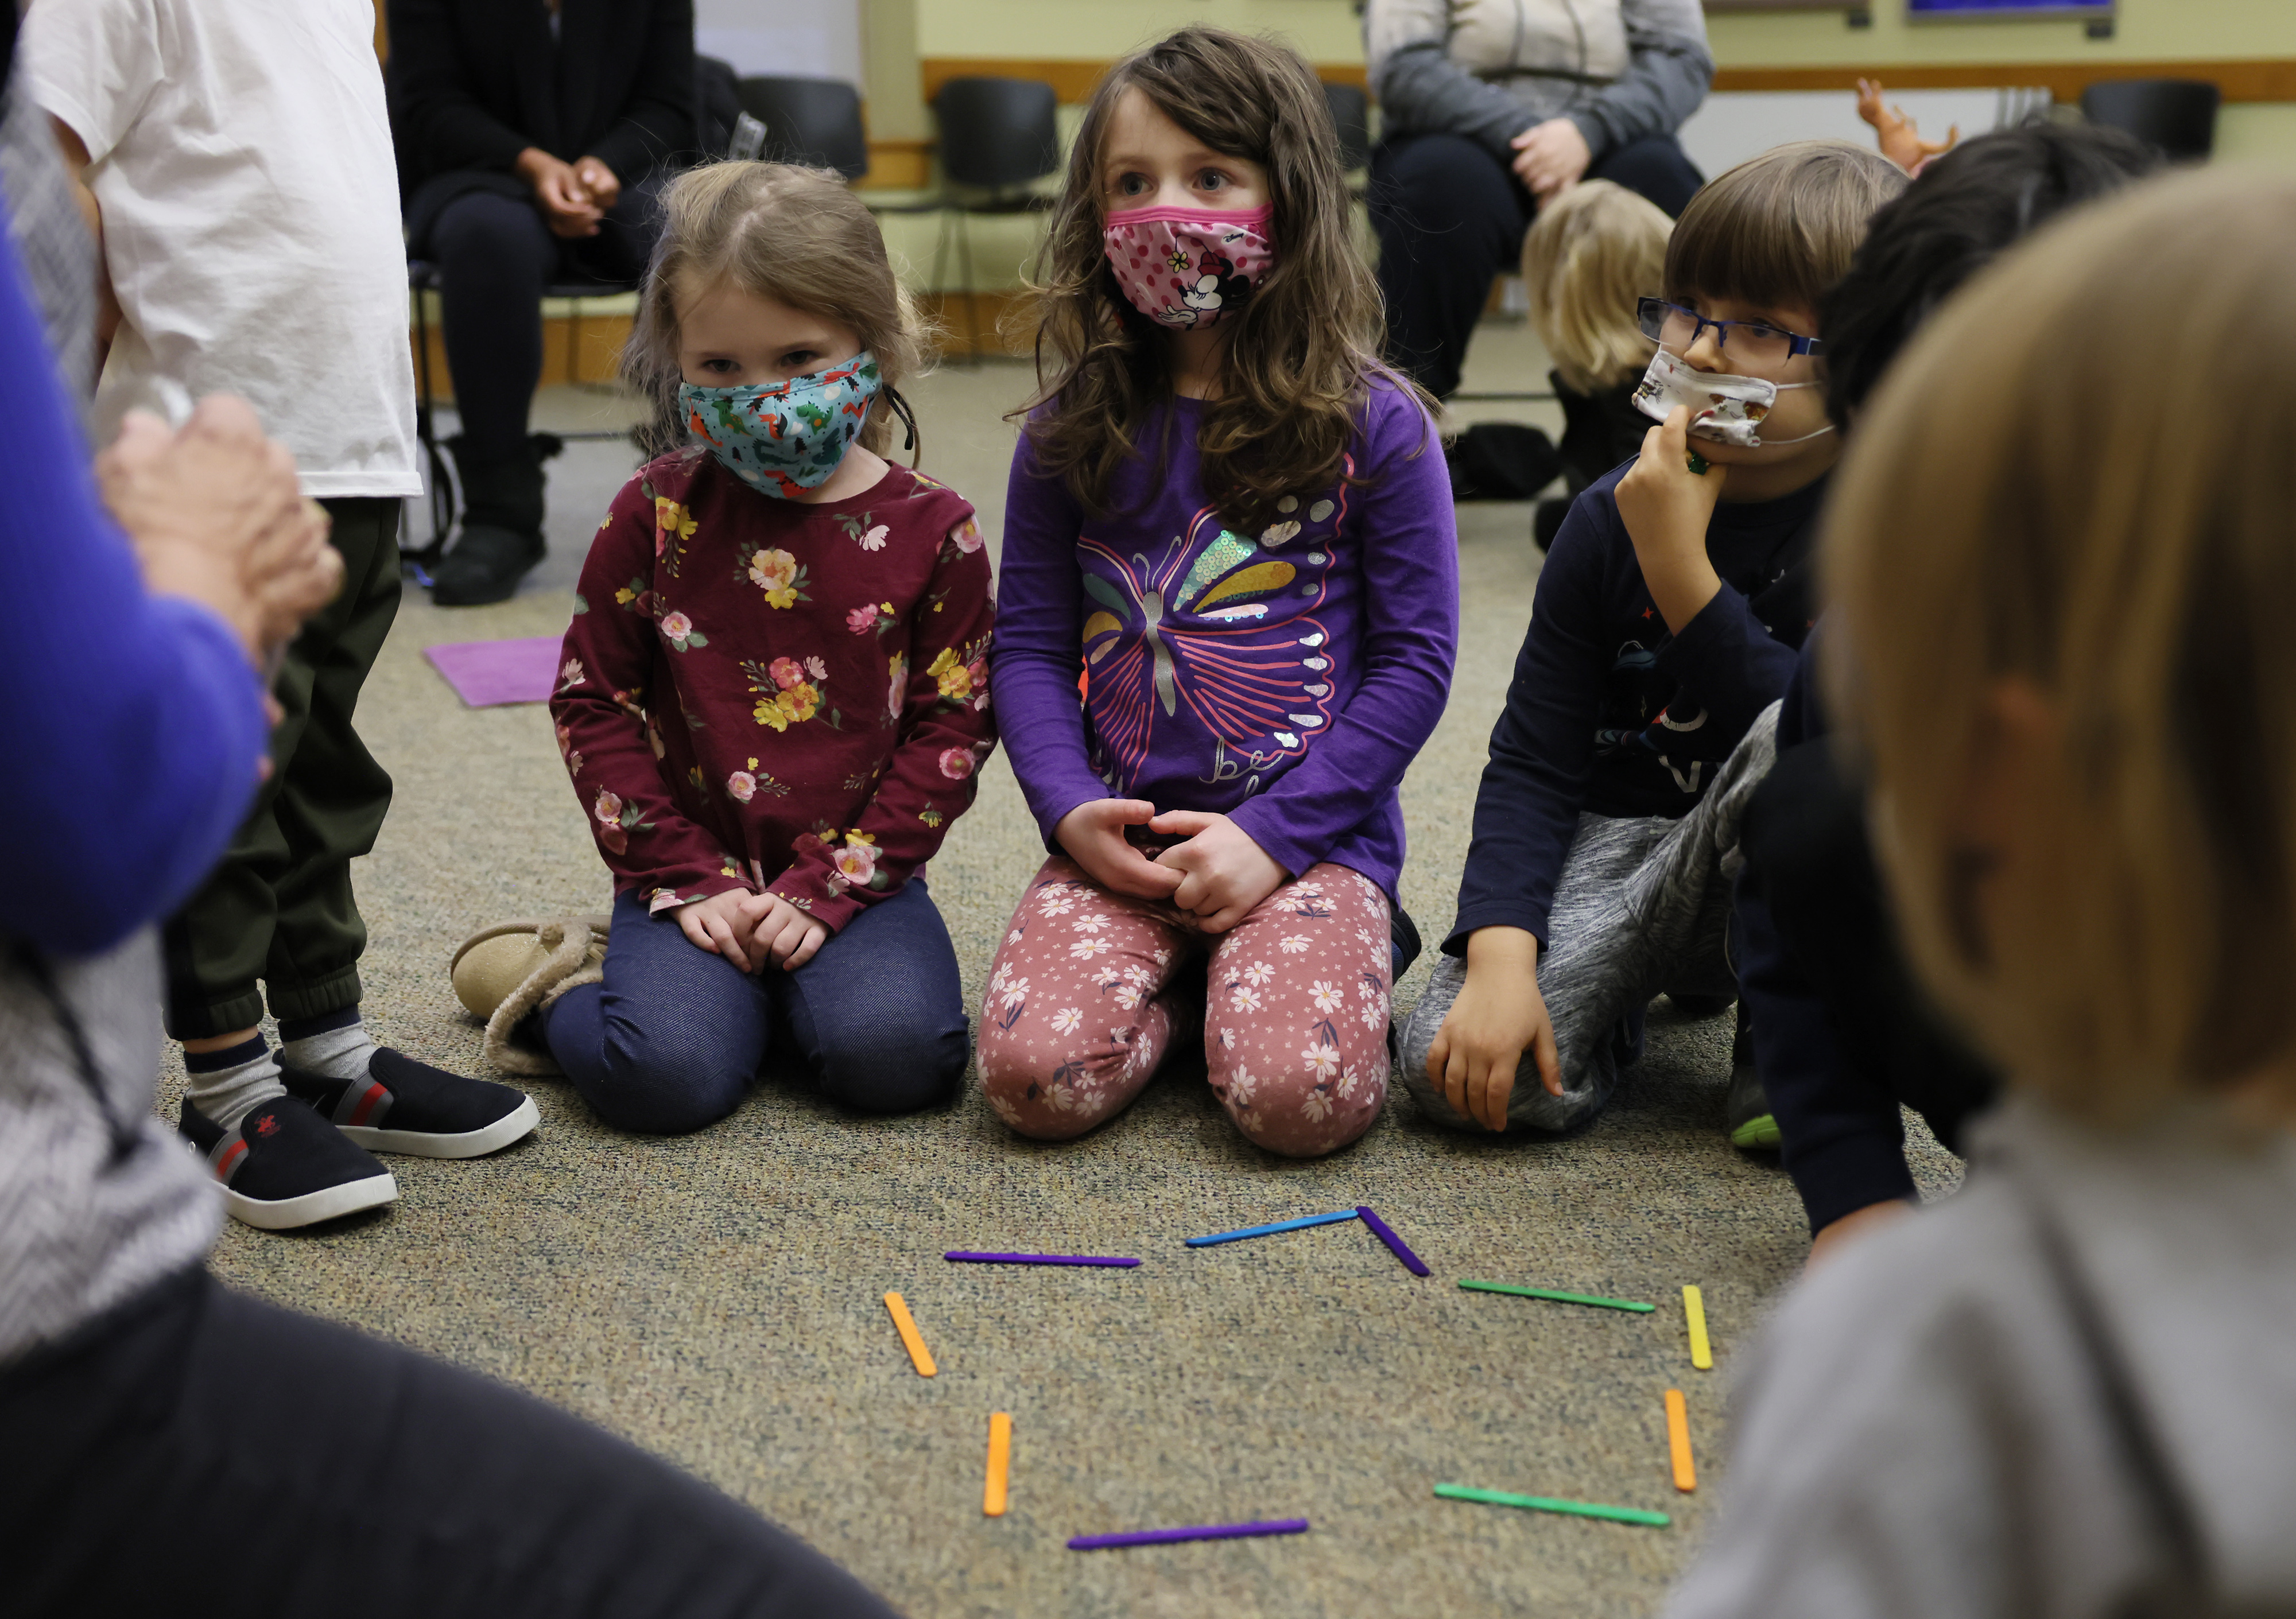 Left to right, Charlotte Wasgatt, 3, Keegan Morin, 4, and Alek Kaplan, 4, listened during a Young Scientist STEM program event on December 8 at the Northborough Free Library.